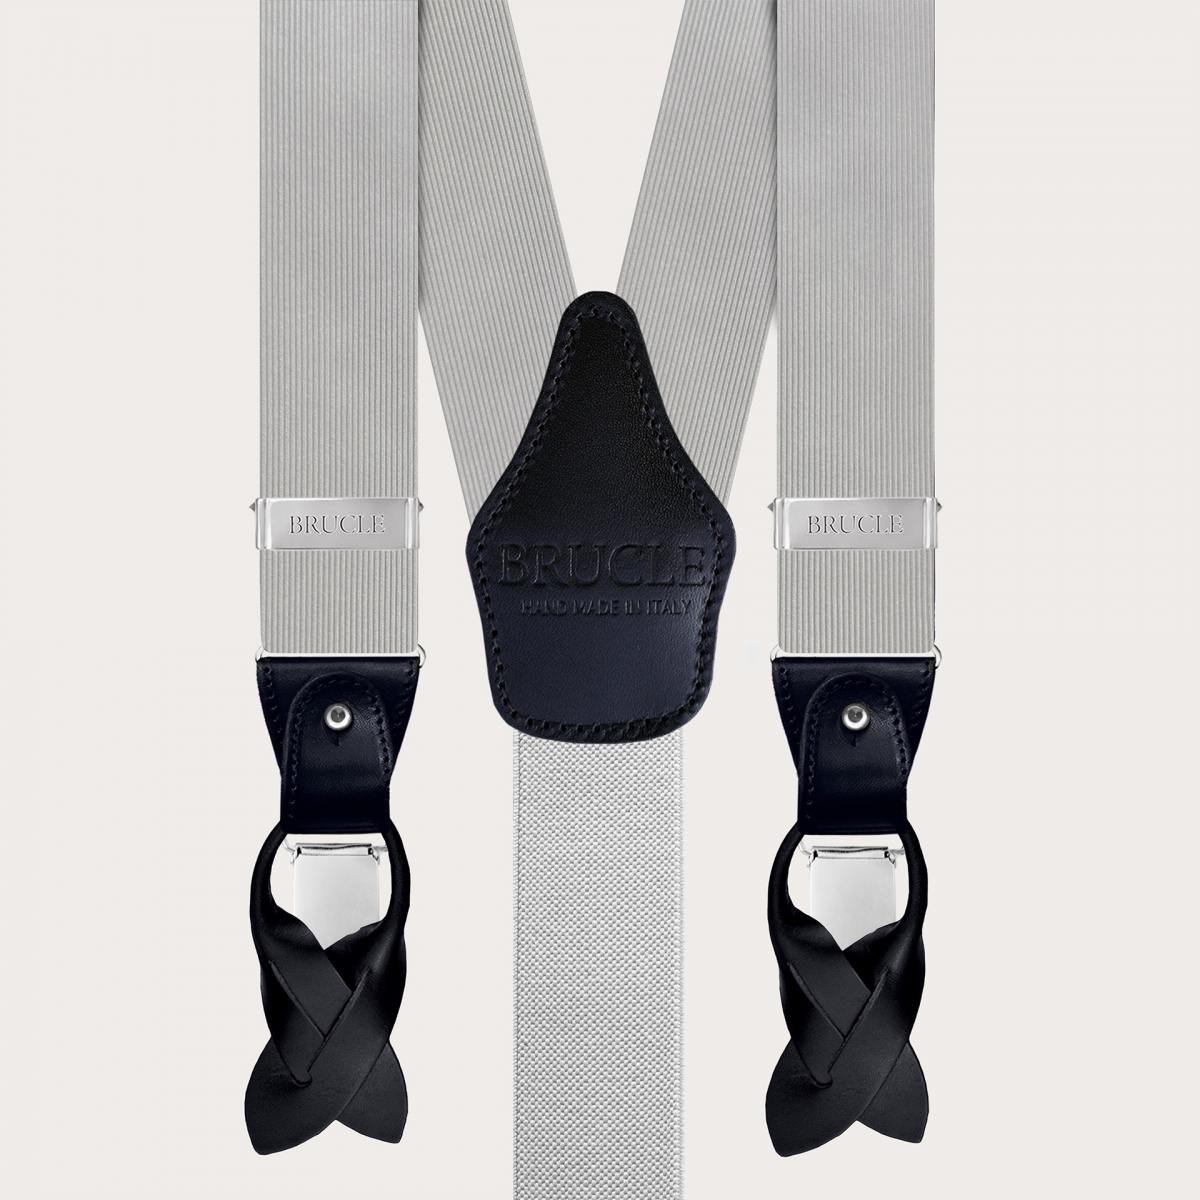 Grey silk jacquard men's suspenders with black leather